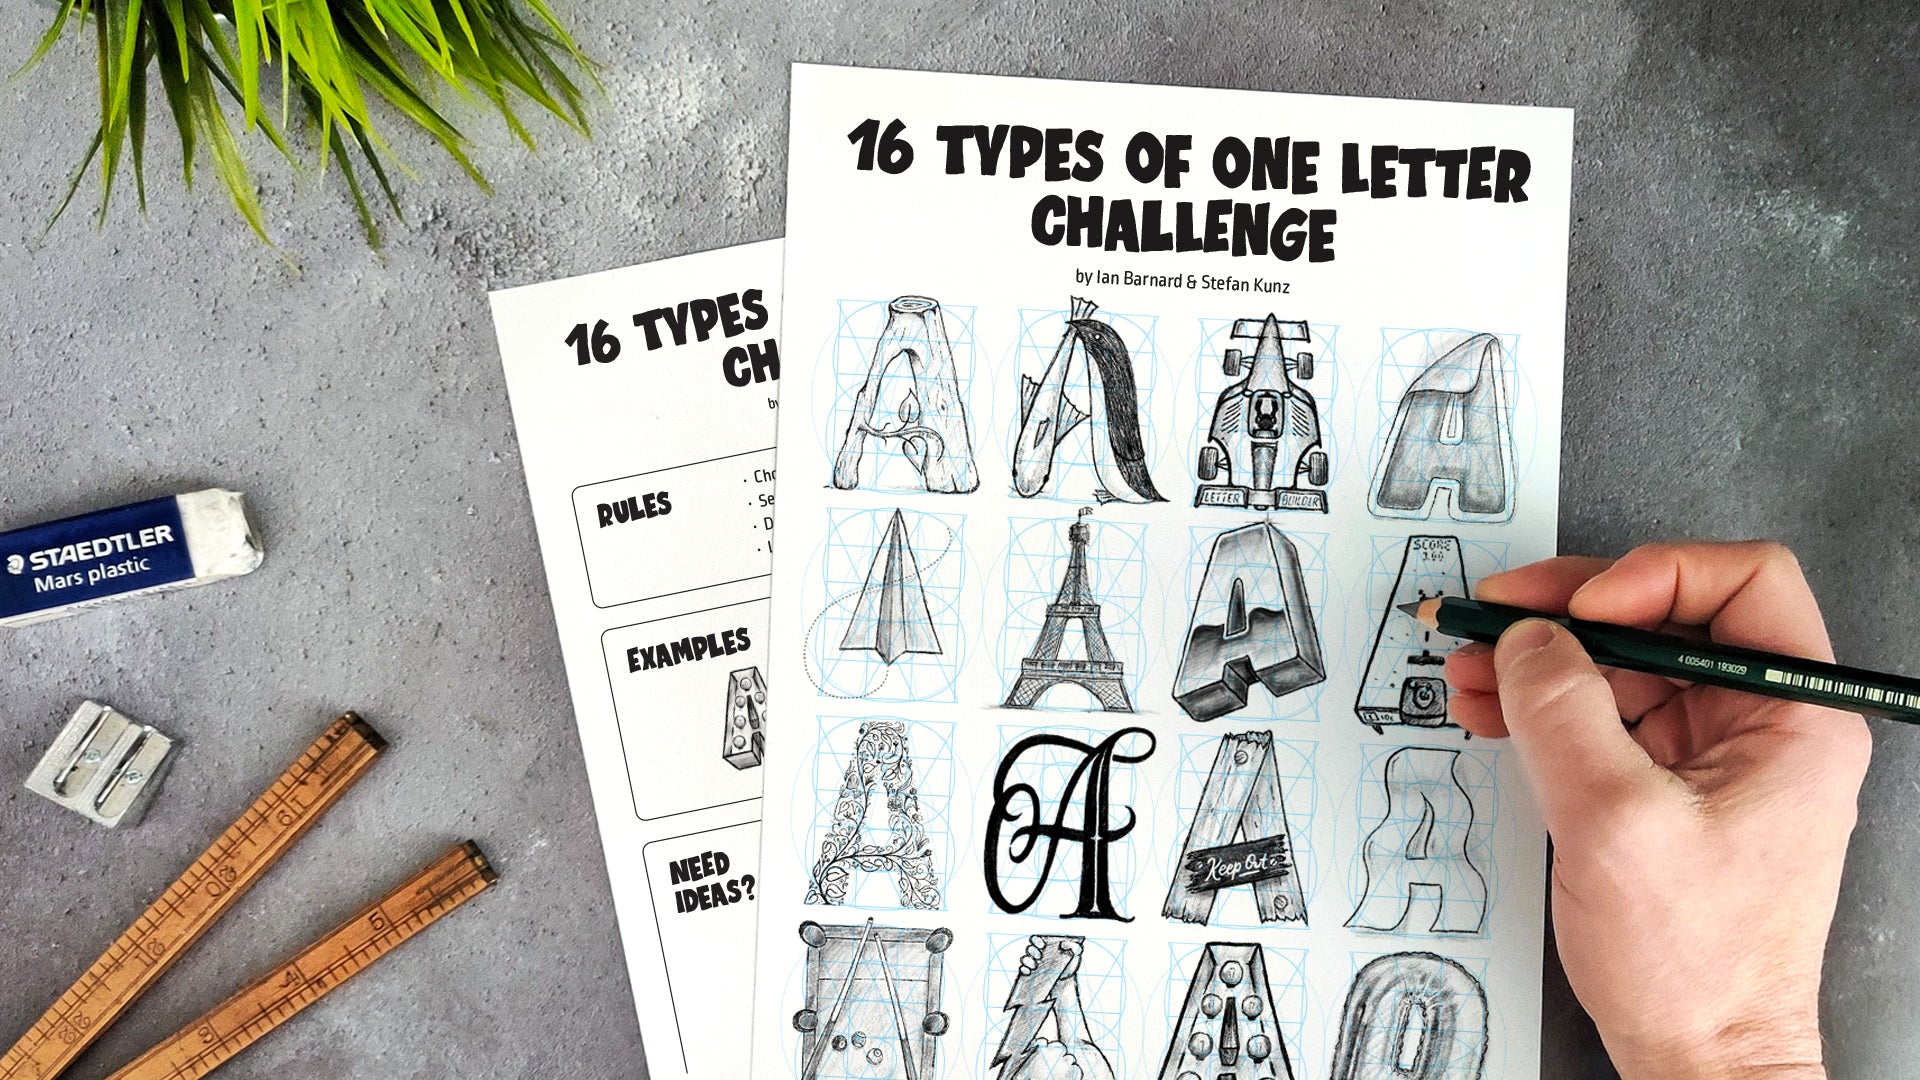 16 Types of One Letter Challenge